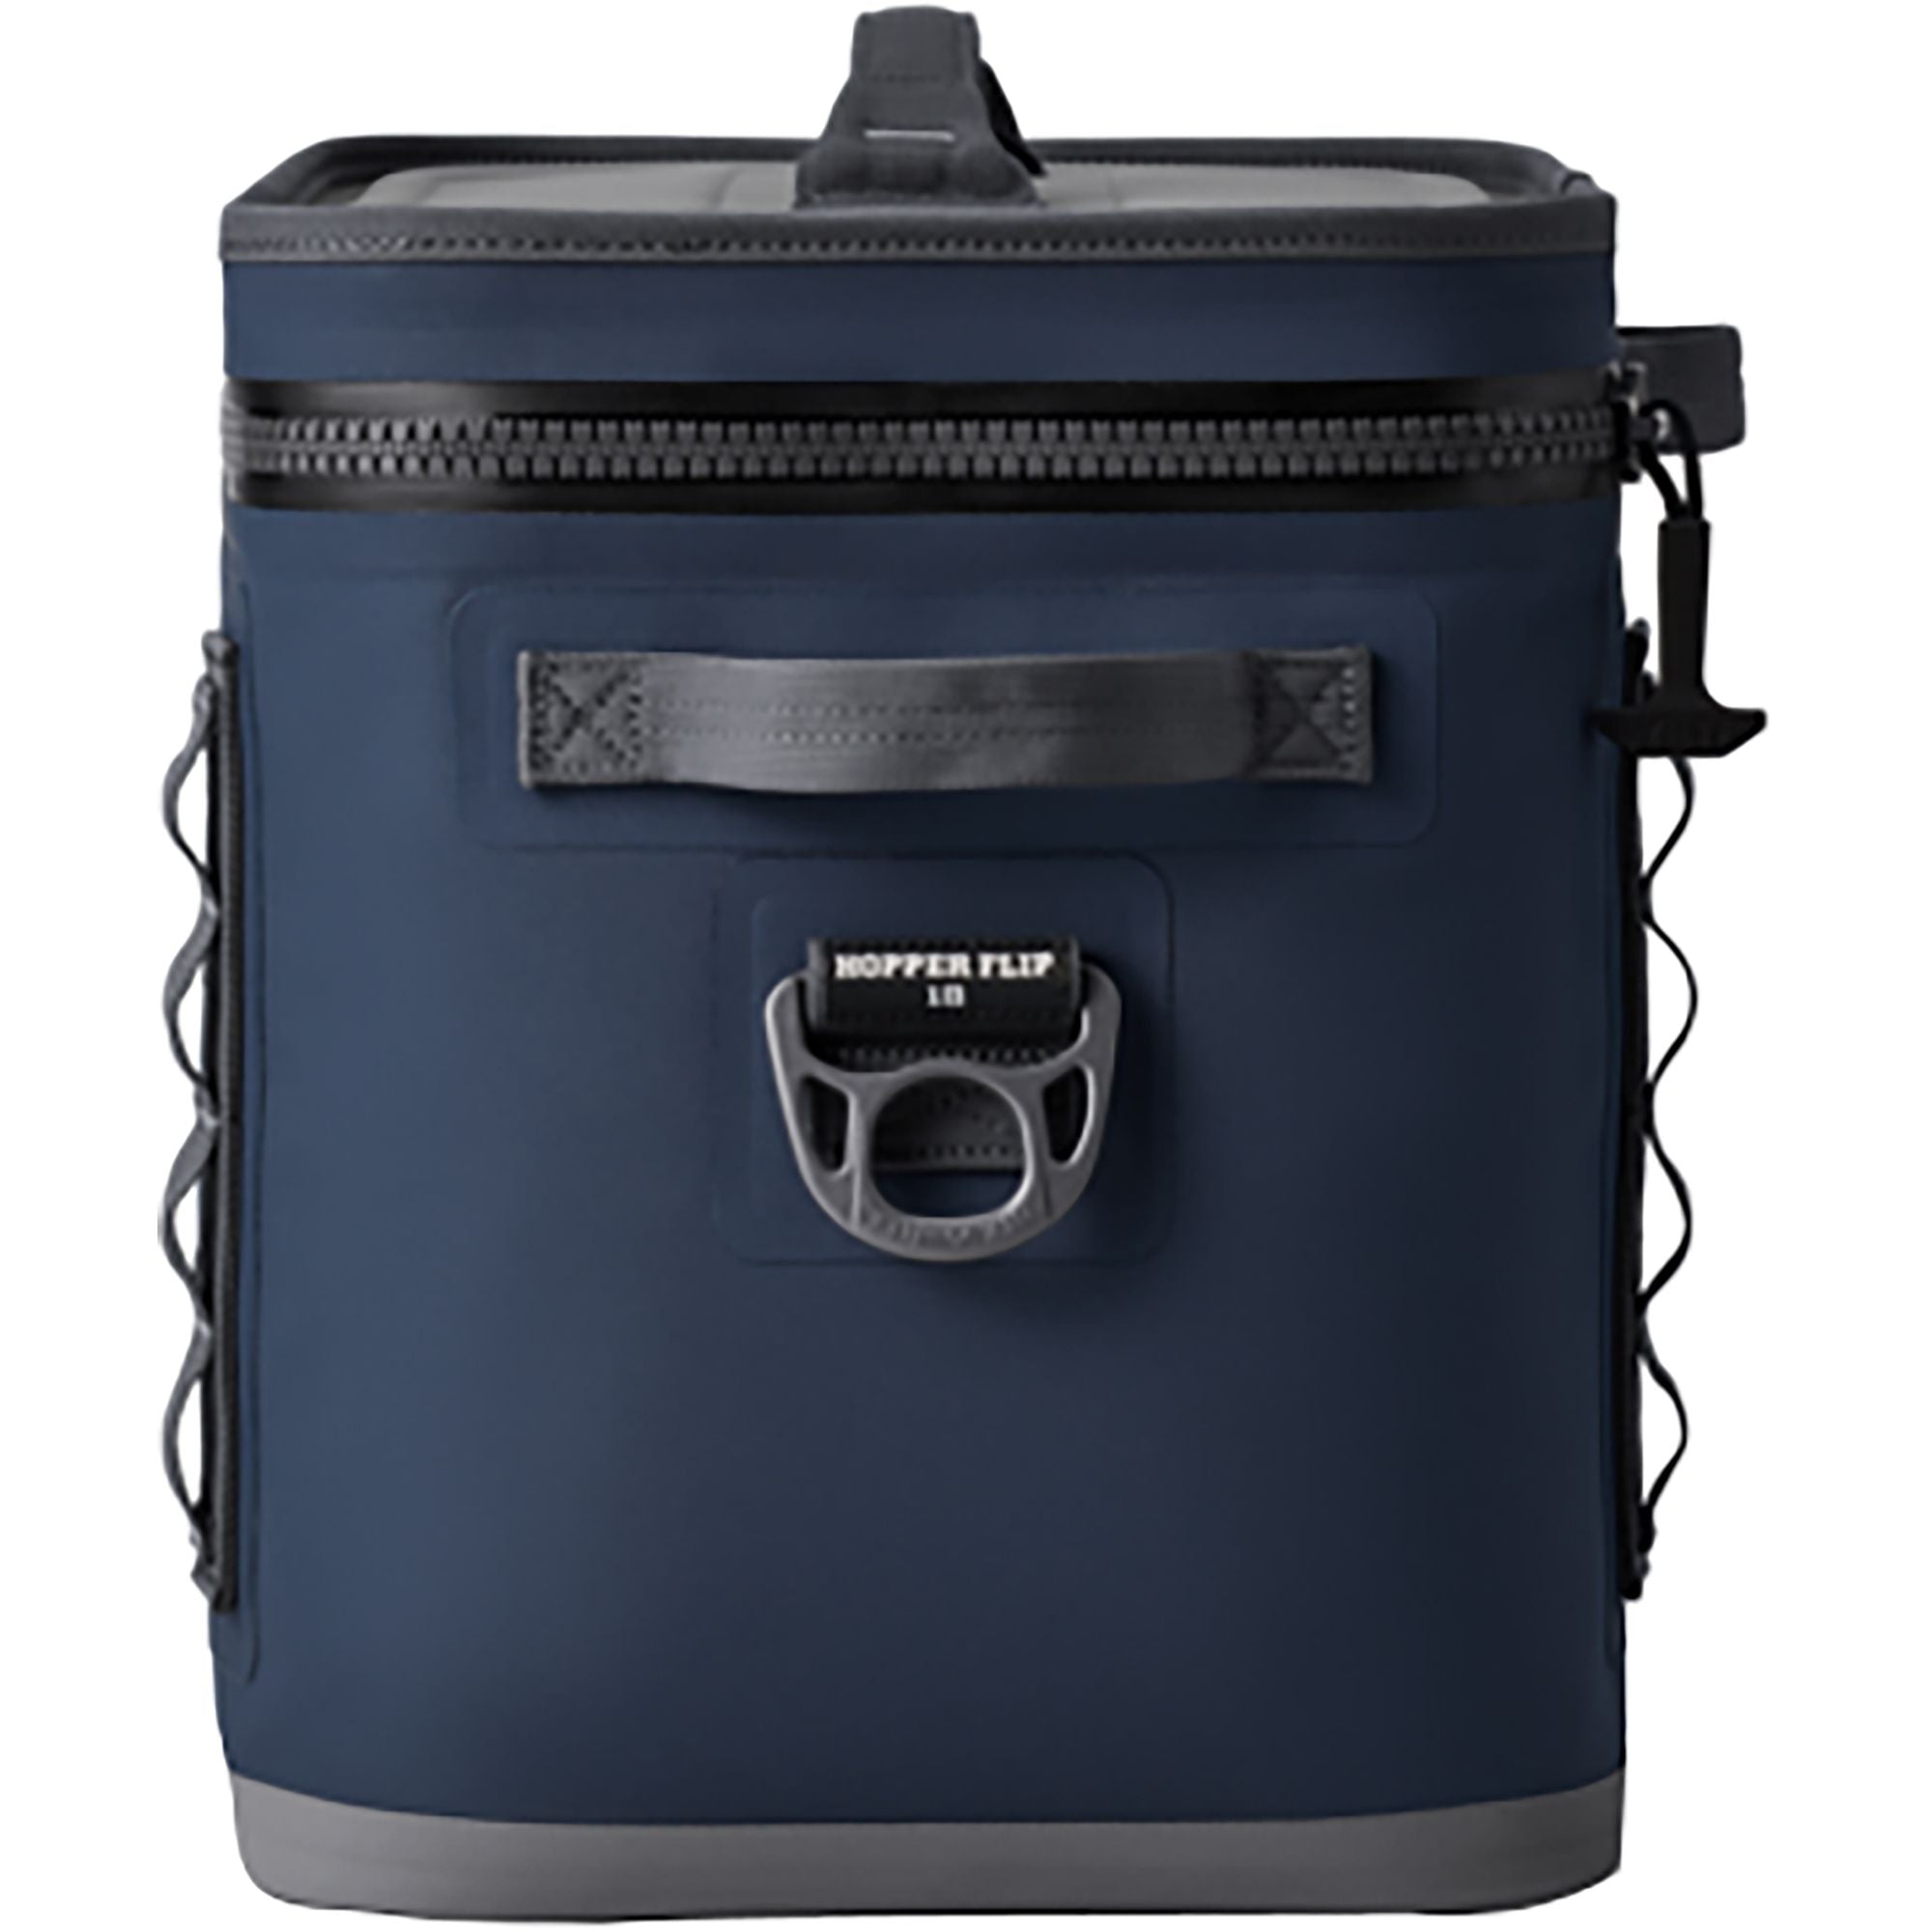 For Sale: Used Yeti Hopper Flip 18 Portable Soft Cooler - Charcoal